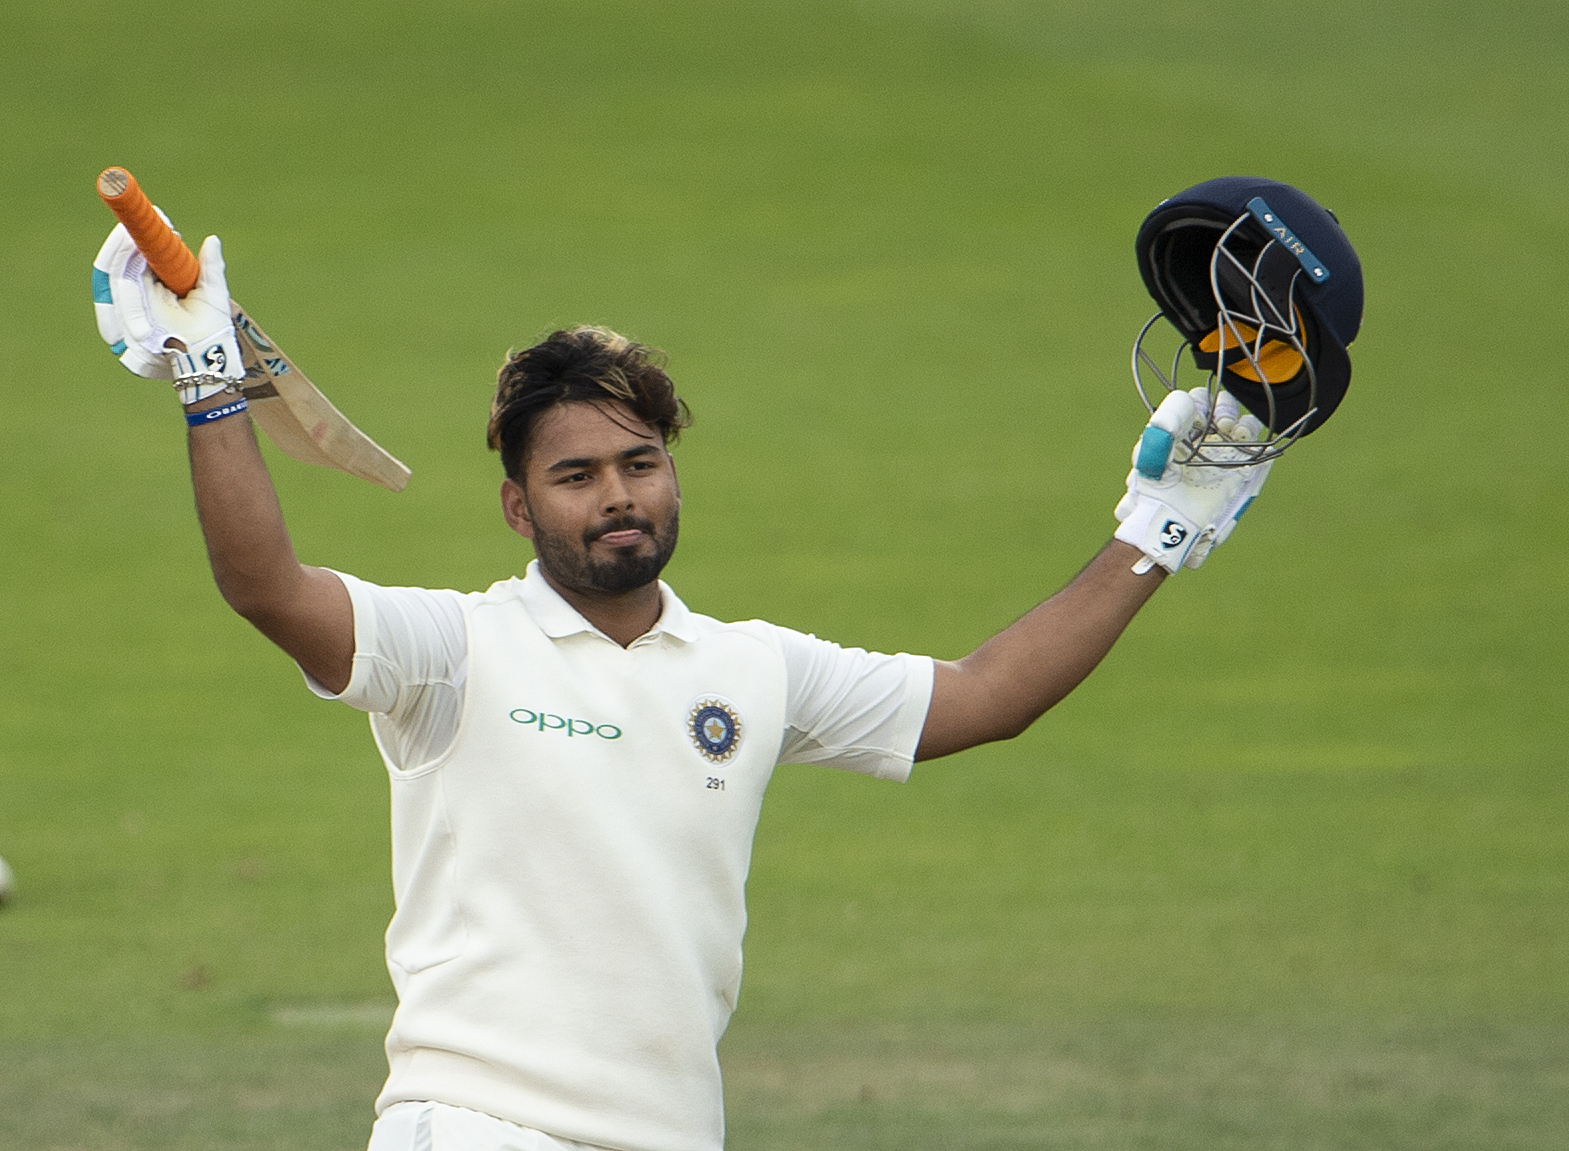 VIDEO | Rishabh Pant flaunts his fitness with a Shawn Michaels Kip Up on the ground